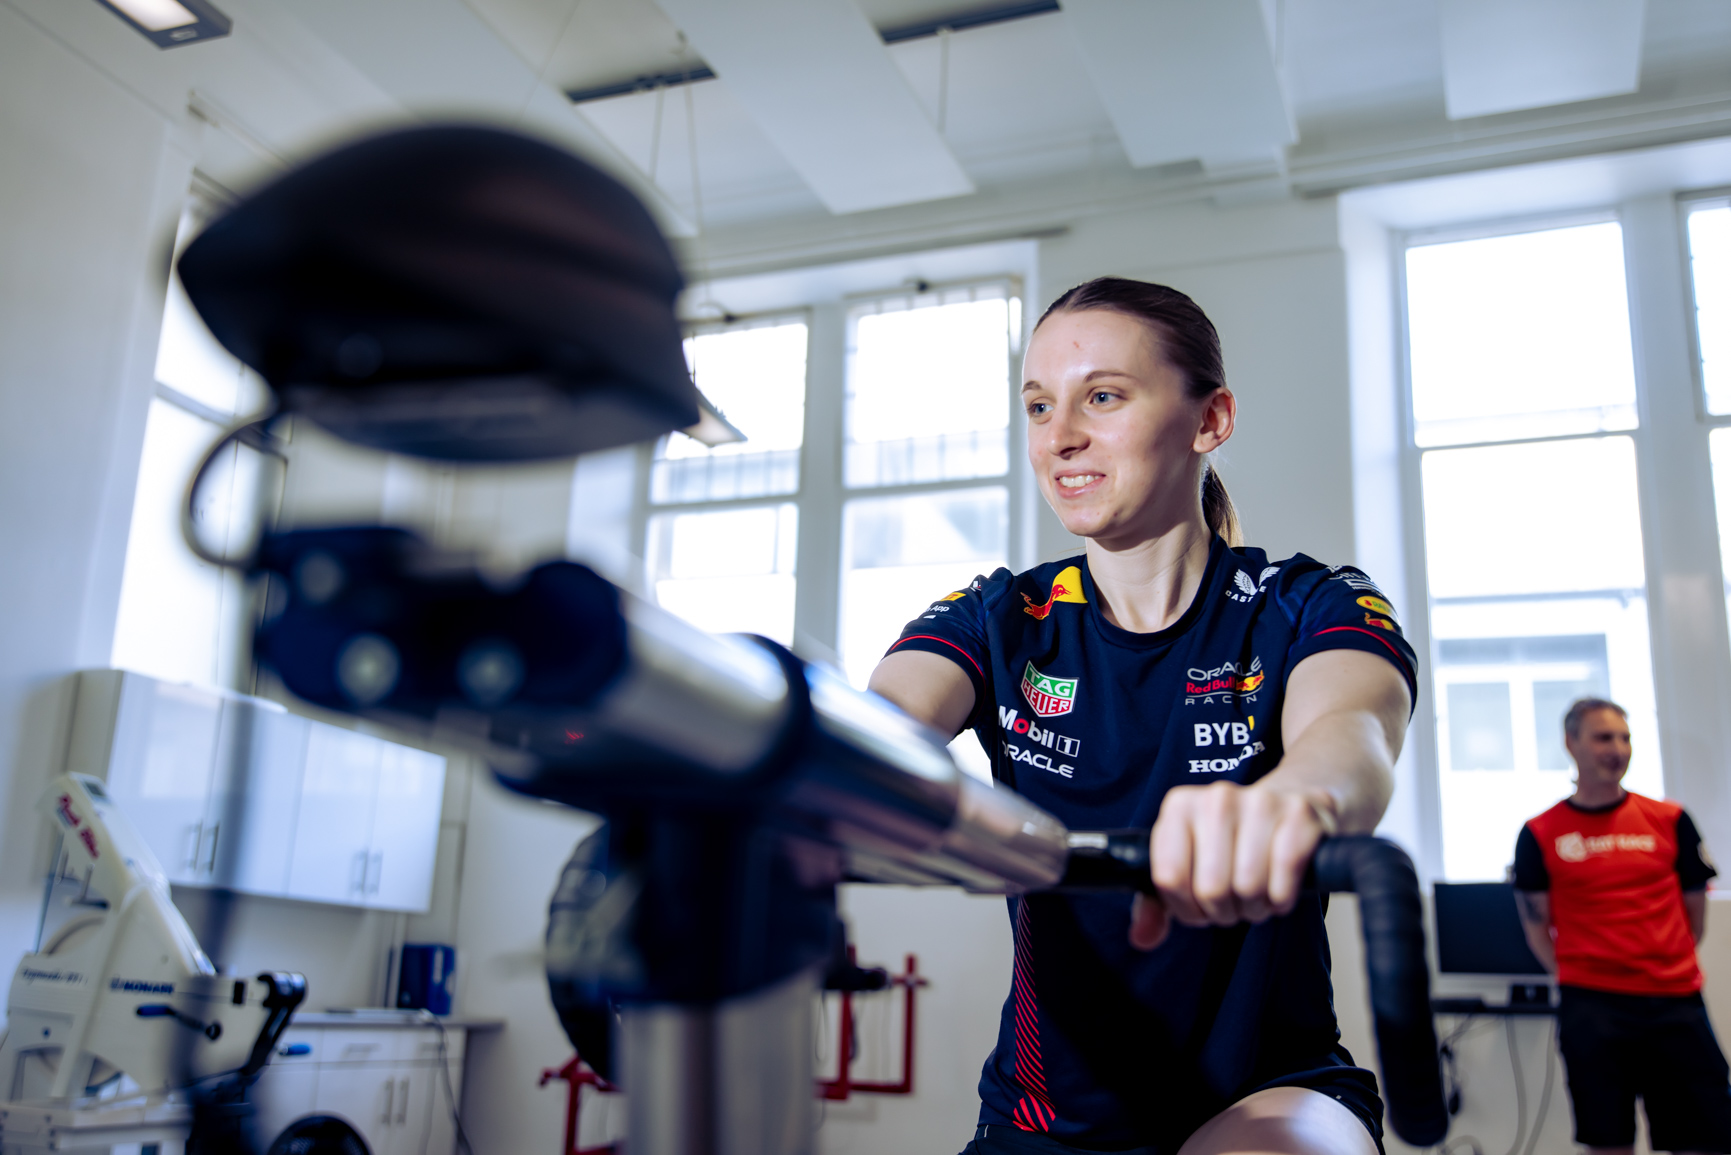 Kanzen Karate's Cerys Hawes smiles as she trains on a bike in the Abertay University sports labs